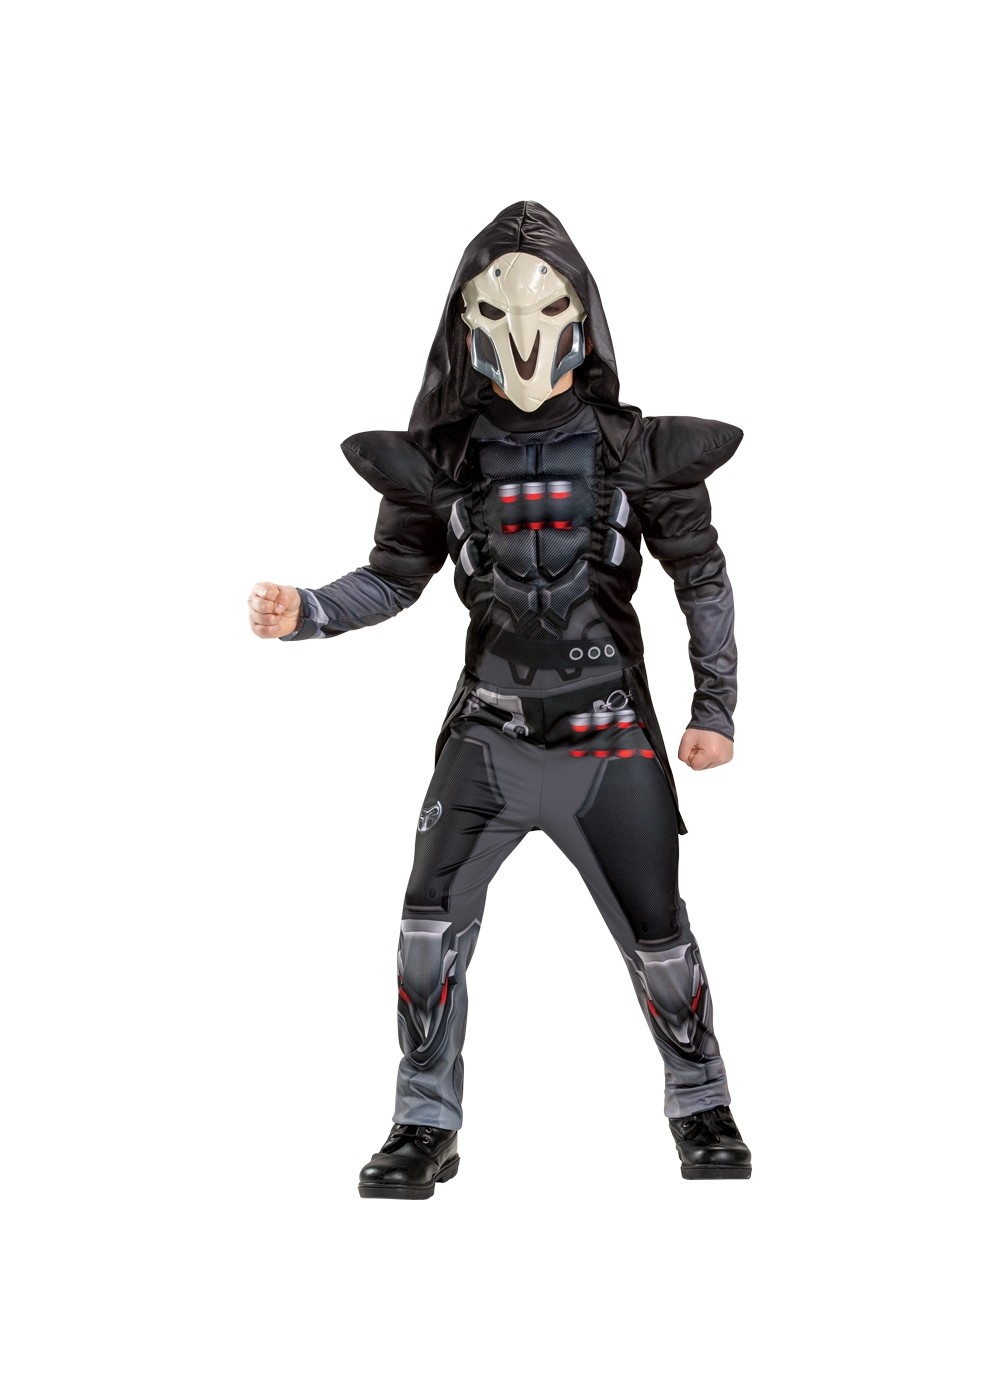 Boys Reaper Overwatch Muscle Costume